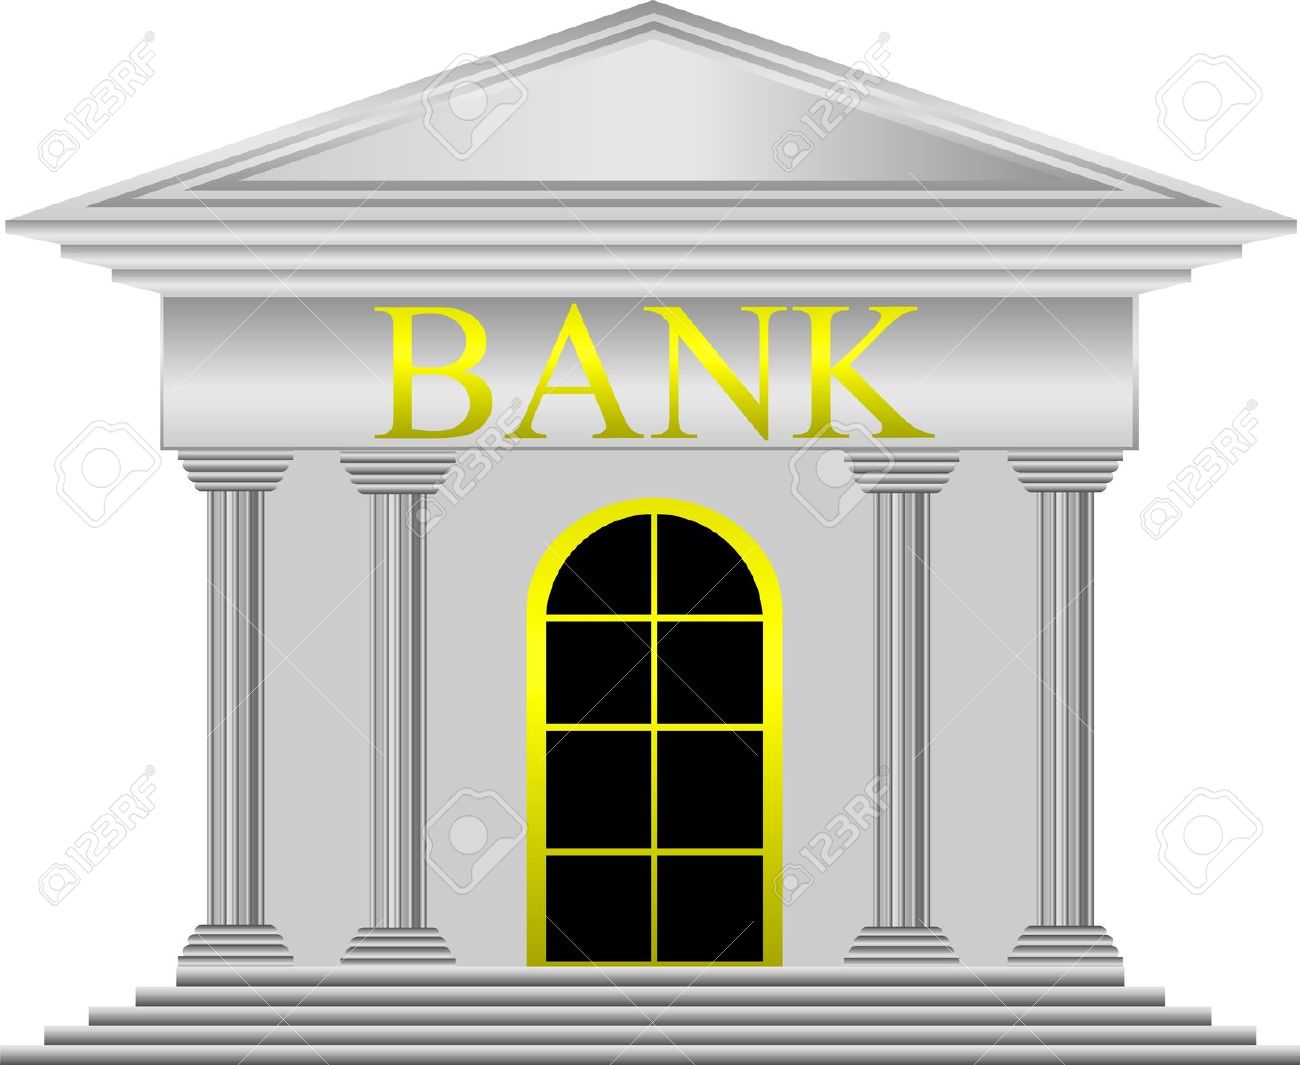 Bank clipart page 1 2